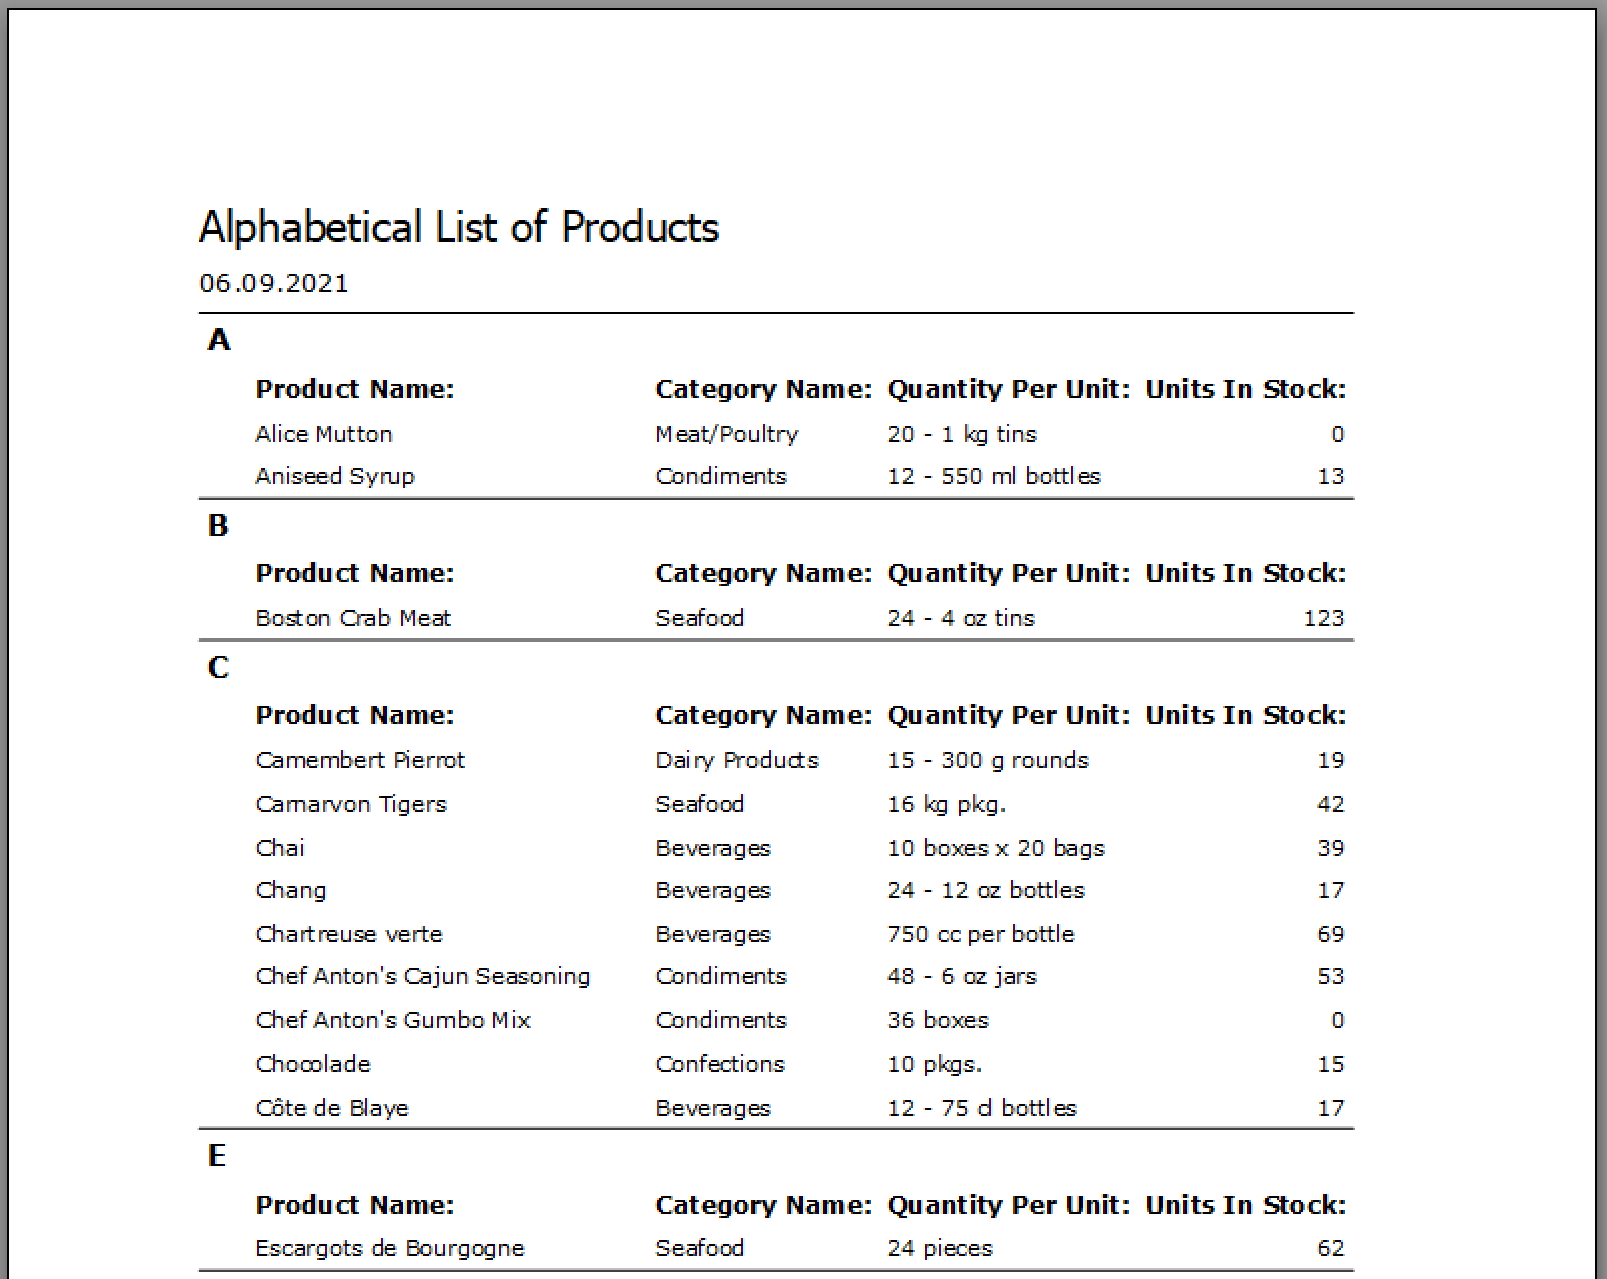 Alphabetical List of Products